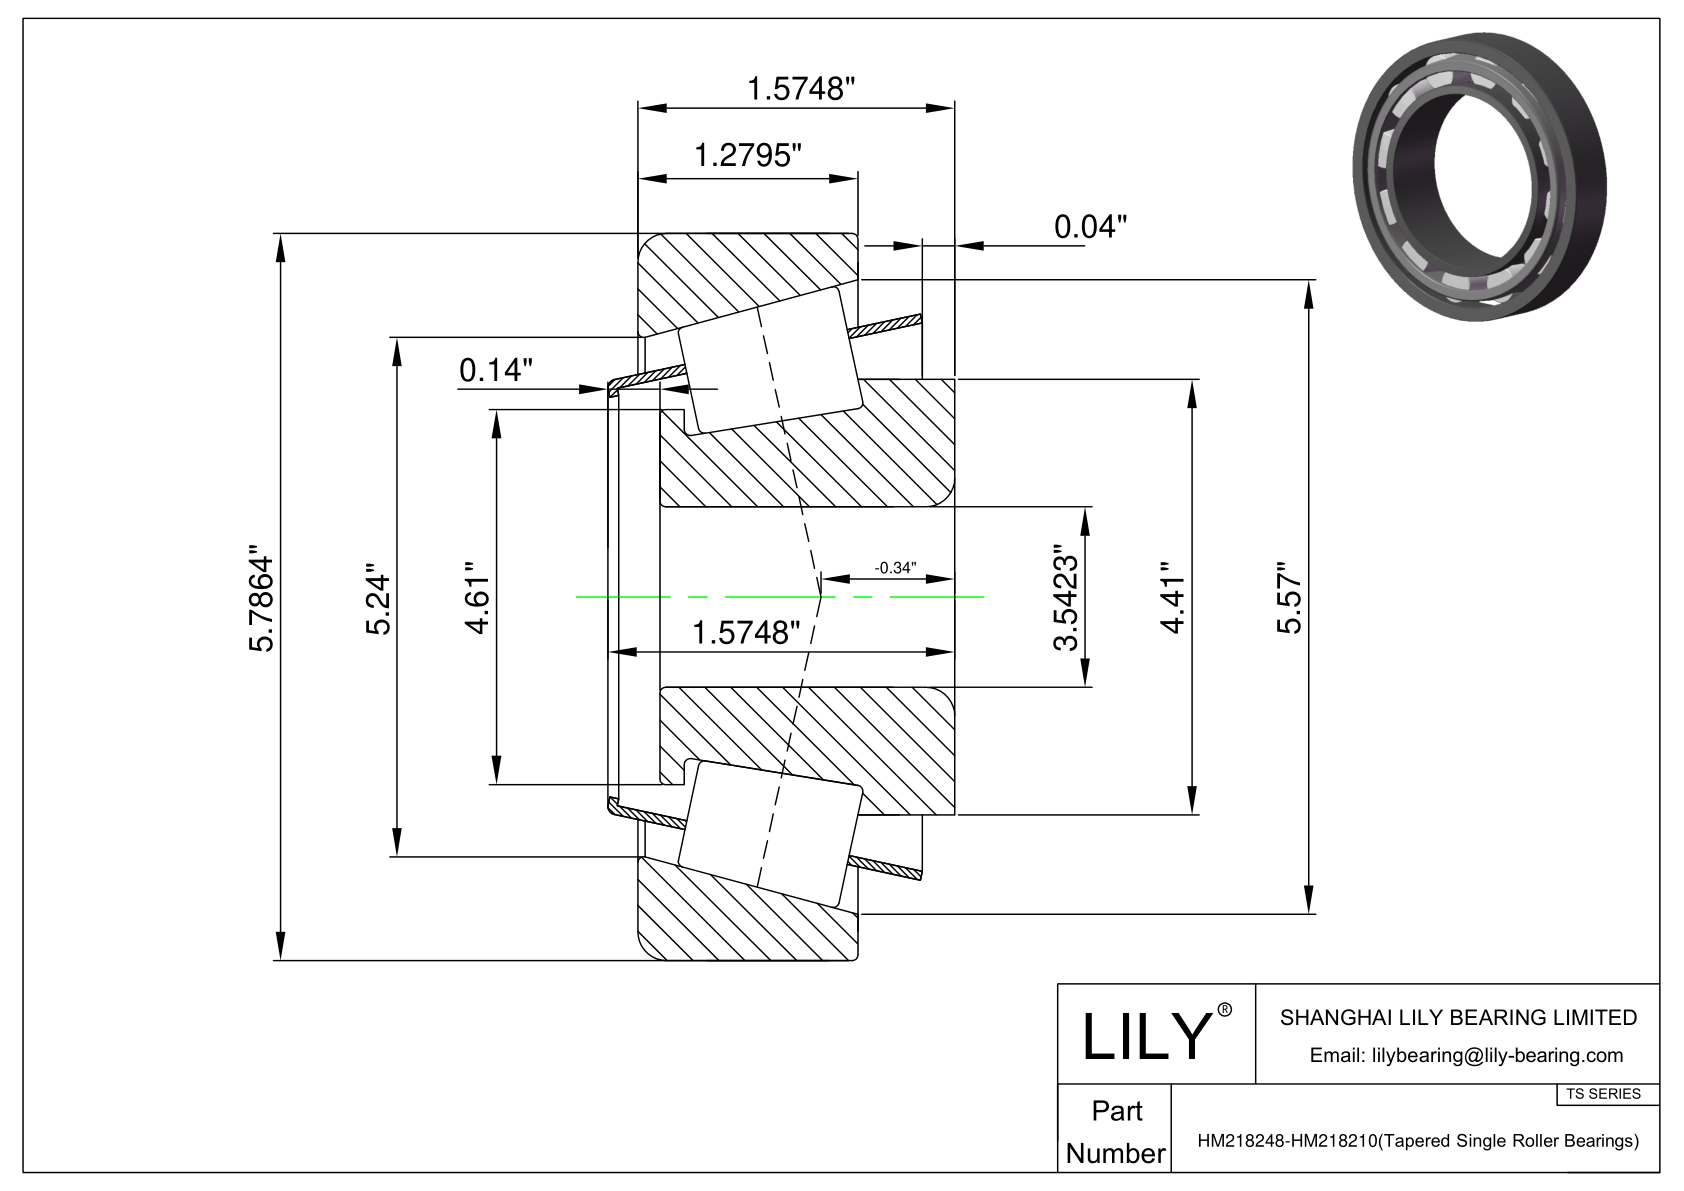 HM218248-HM218210 TS (Tapered Single Roller Bearings) (Imperial) cad drawing